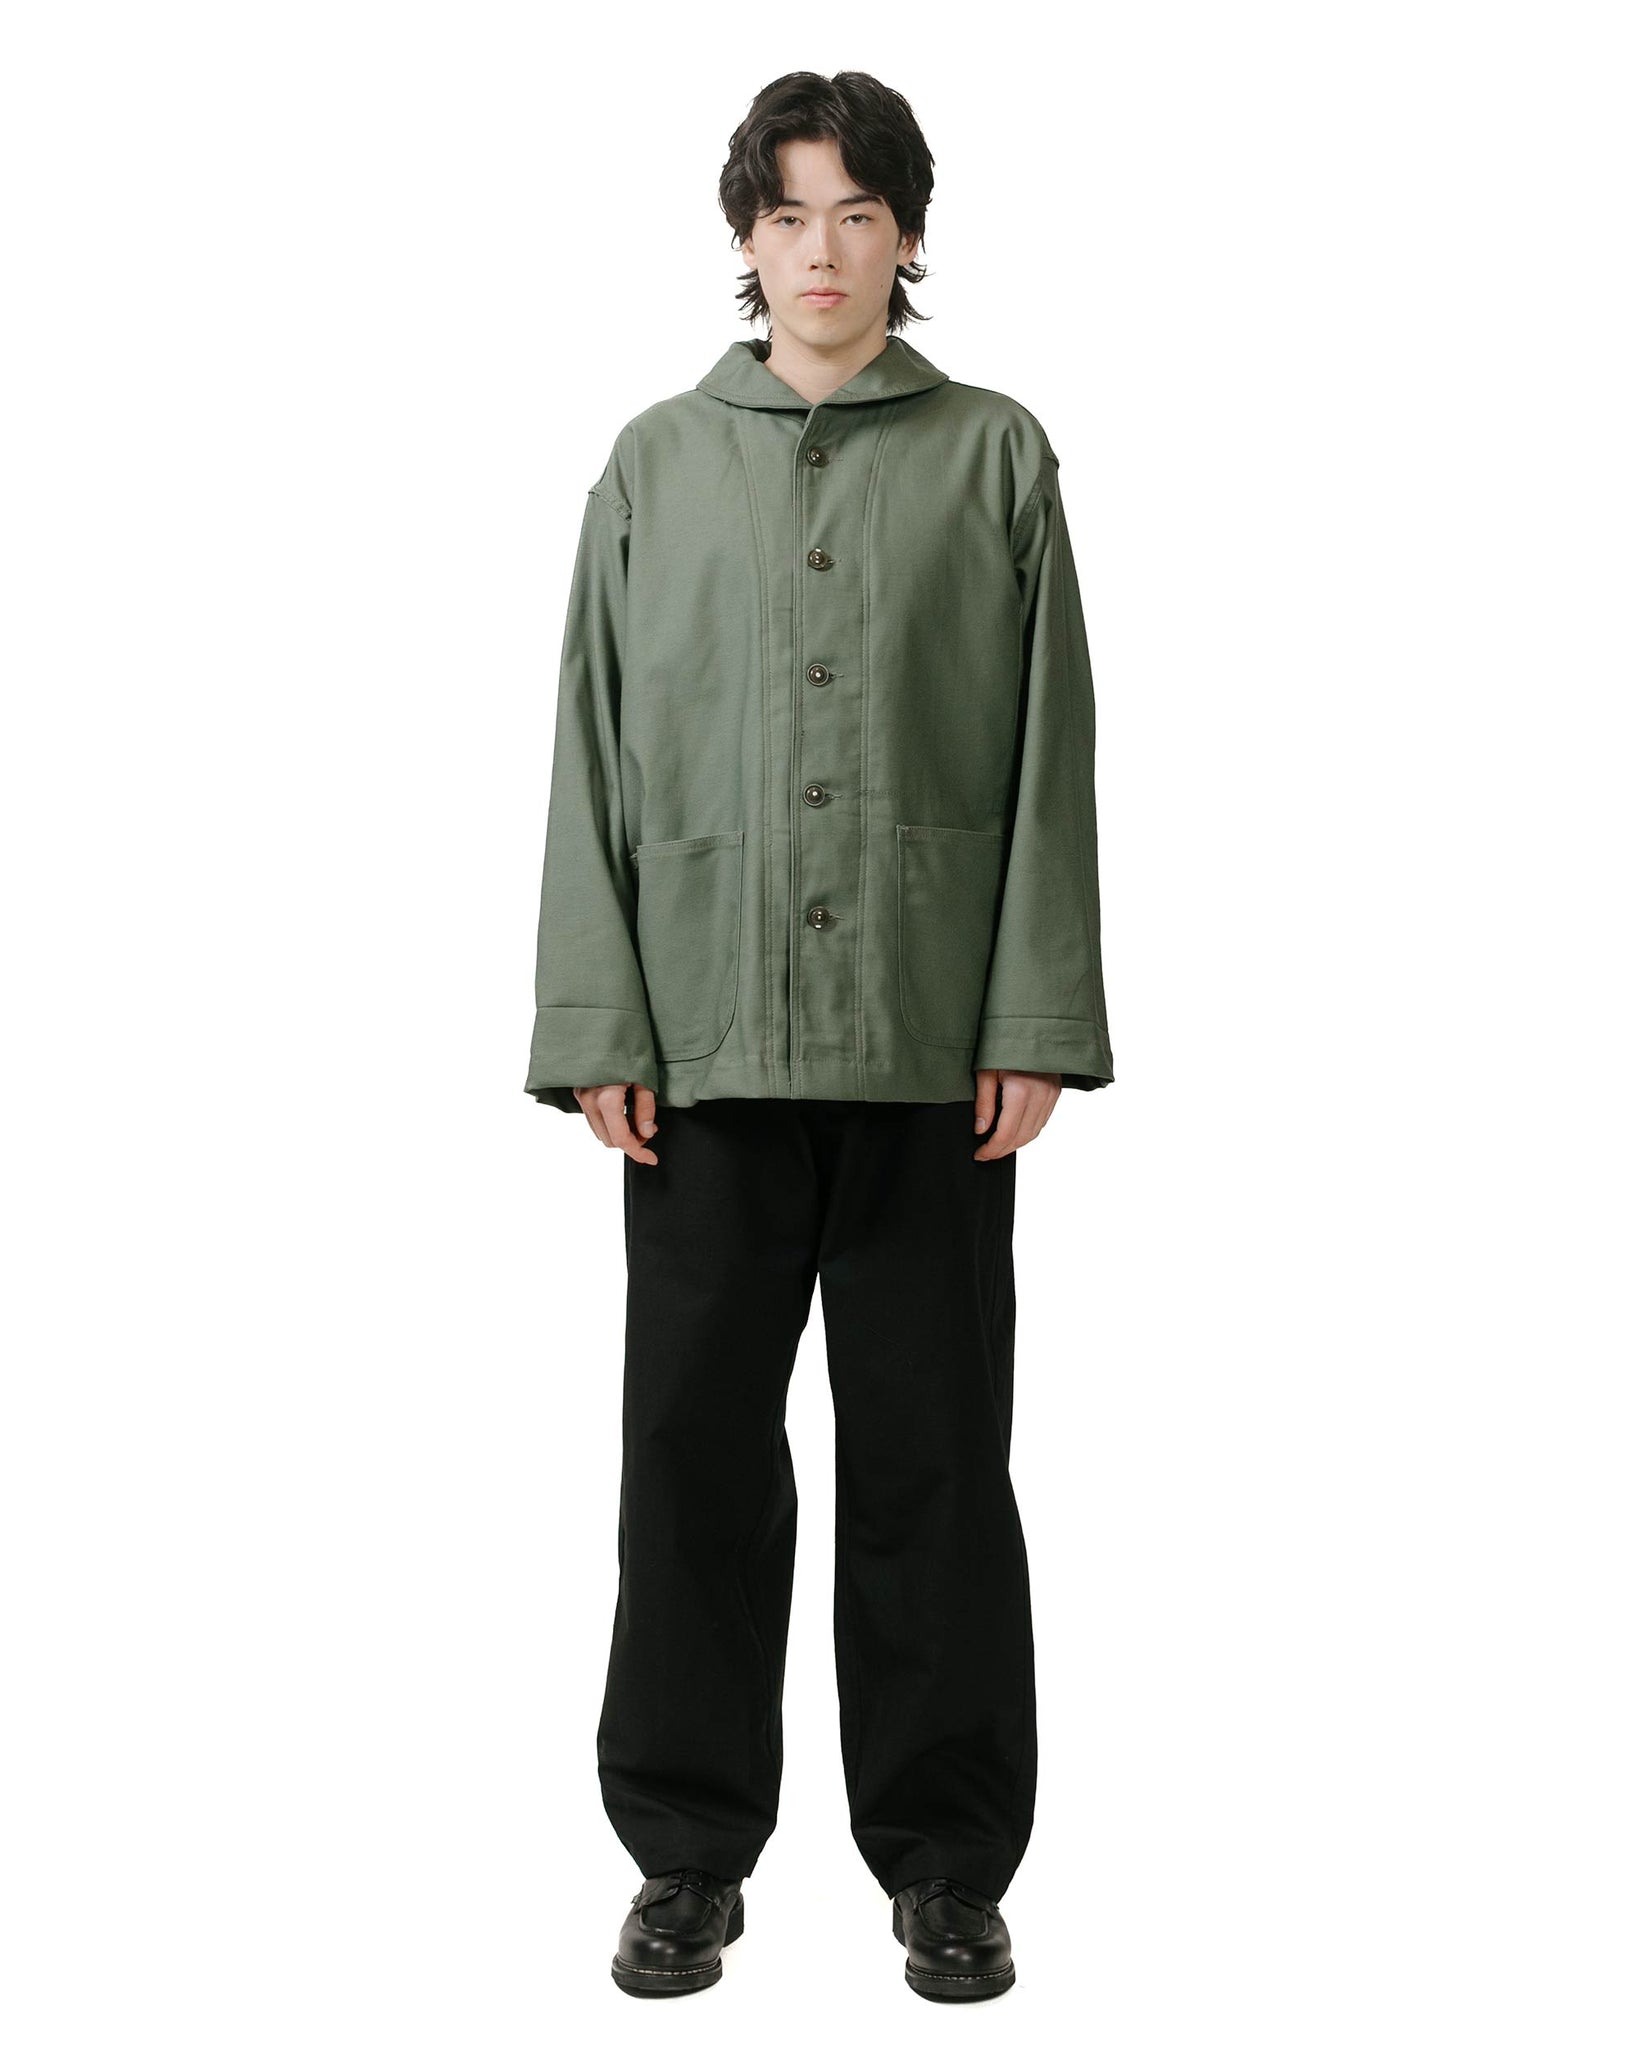 Engineered Garments Workaday Utility Pant Black Cotton Ripstop model full